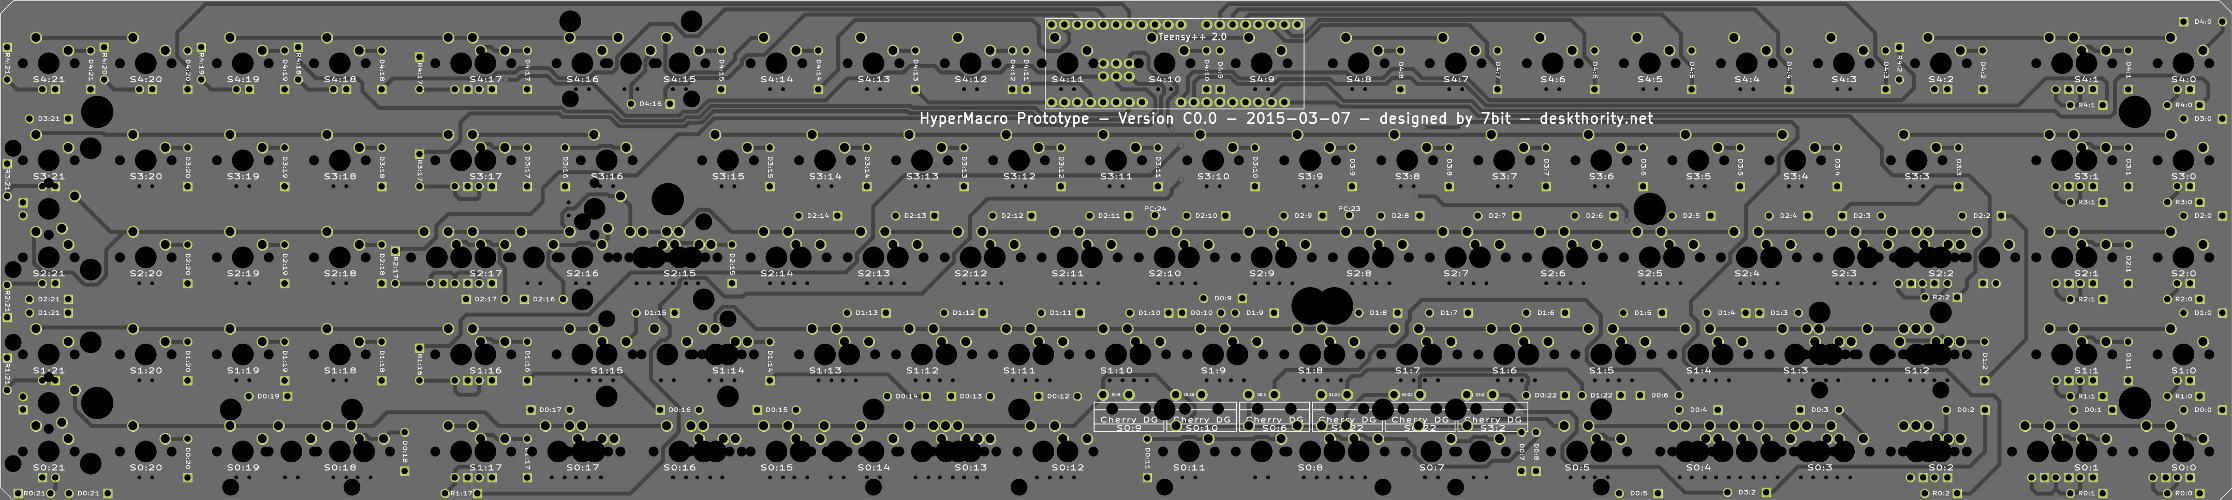 HyperMacro_PCB_back.png